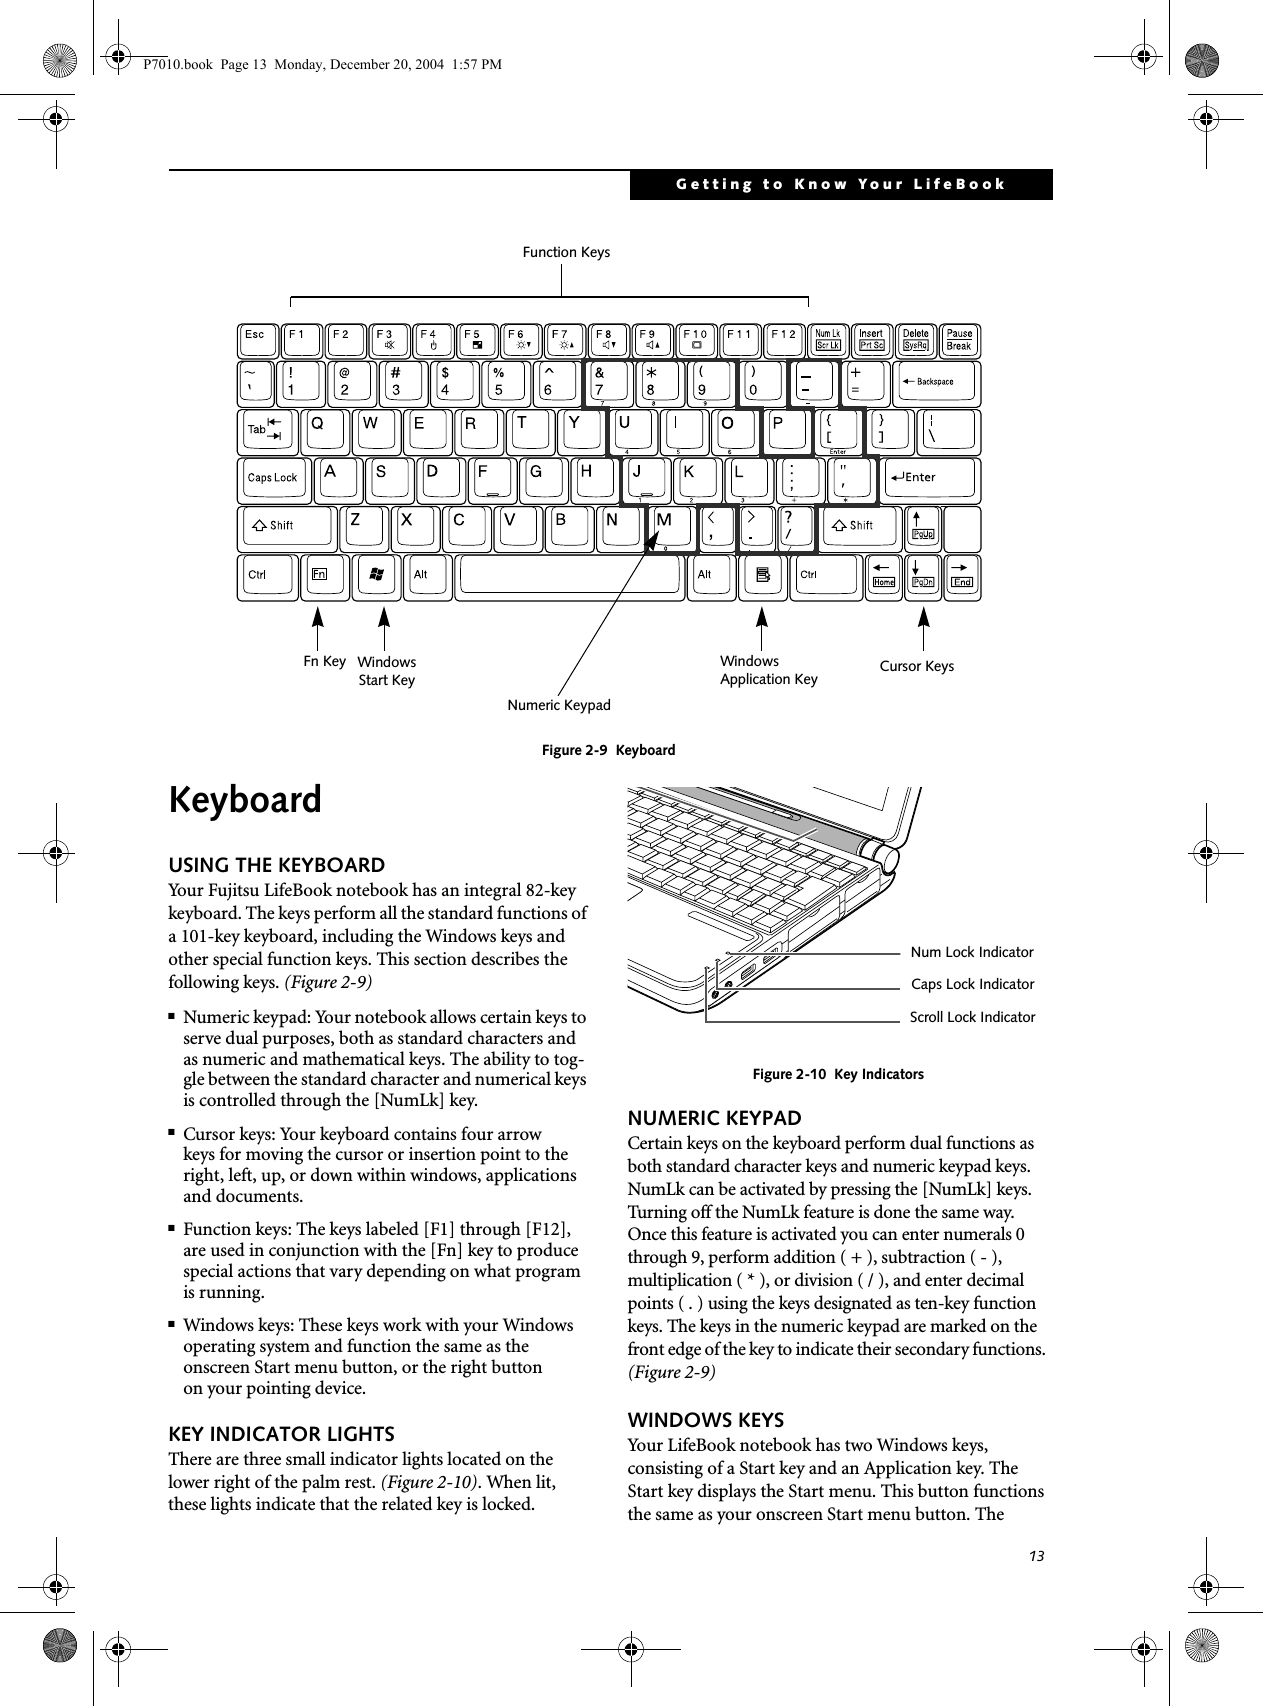 13Getting to Know Your LifeBookFigure 2-9  KeyboardKeyboard USING THE KEYBOARDYour Fujitsu LifeBook notebook has an integral 82-key keyboard. The keys perform all the standard functions of a 101-key keyboard, including the Windows keys and other special function keys. This section describes the following keys. (Figure 2-9)■Numeric keypad: Your notebook allows certain keys to serve dual purposes, both as standard characters and as numeric and mathematical keys. The ability to tog-gle between the standard character and numerical keys is controlled through the [NumLk] key.■Cursor keys: Your keyboard contains four arrowkeys for moving the cursor or insertion point to the right, left, up, or down within windows, applications and documents. ■Function keys: The keys labeled [F1] through [F12], are used in conjunction with the [Fn] key to produce special actions that vary depending on what program is running. ■Windows keys: These keys work with your Windows operating system and function the same as the onscreen Start menu button, or the right buttonon your pointing device.KEY INDICATOR LIGHTSThere are three small indicator lights located on the lower right of the palm rest. (Figure 2-10). When lit, these lights indicate that the related key is locked. Figure 2-10  Key IndicatorsNUMERIC KEYPADCertain keys on the keyboard perform dual functions as both standard character keys and numeric keypad keys. NumLk can be activated by pressing the [NumLk] keys. Turning off the NumLk feature is done the same way. Once this feature is activated you can enter numerals 0 through 9, perform addition ( + ), subtraction ( - ),multiplication ( * ), or division ( / ), and enter decimal points ( . ) using the keys designated as ten-key function keys. The keys in the numeric keypad are marked on the front edge of the key to indicate their secondary functions. (Figure 2-9) WINDOWS KEYSYour LifeBook notebook has two Windows keys, consisting of a Start key and an Application key. The Start key displays the Start menu. This button functions the same as your onscreen Start menu button. The Fn Key WindowsFunction KeysNumeric KeypadCursor KeysWindowsApplication KeyStart KeyNum Lock IndicatorCaps Lock Indicator Scroll Lock Indicator P7010.book  Page 13  Monday, December 20, 2004  1:57 PM